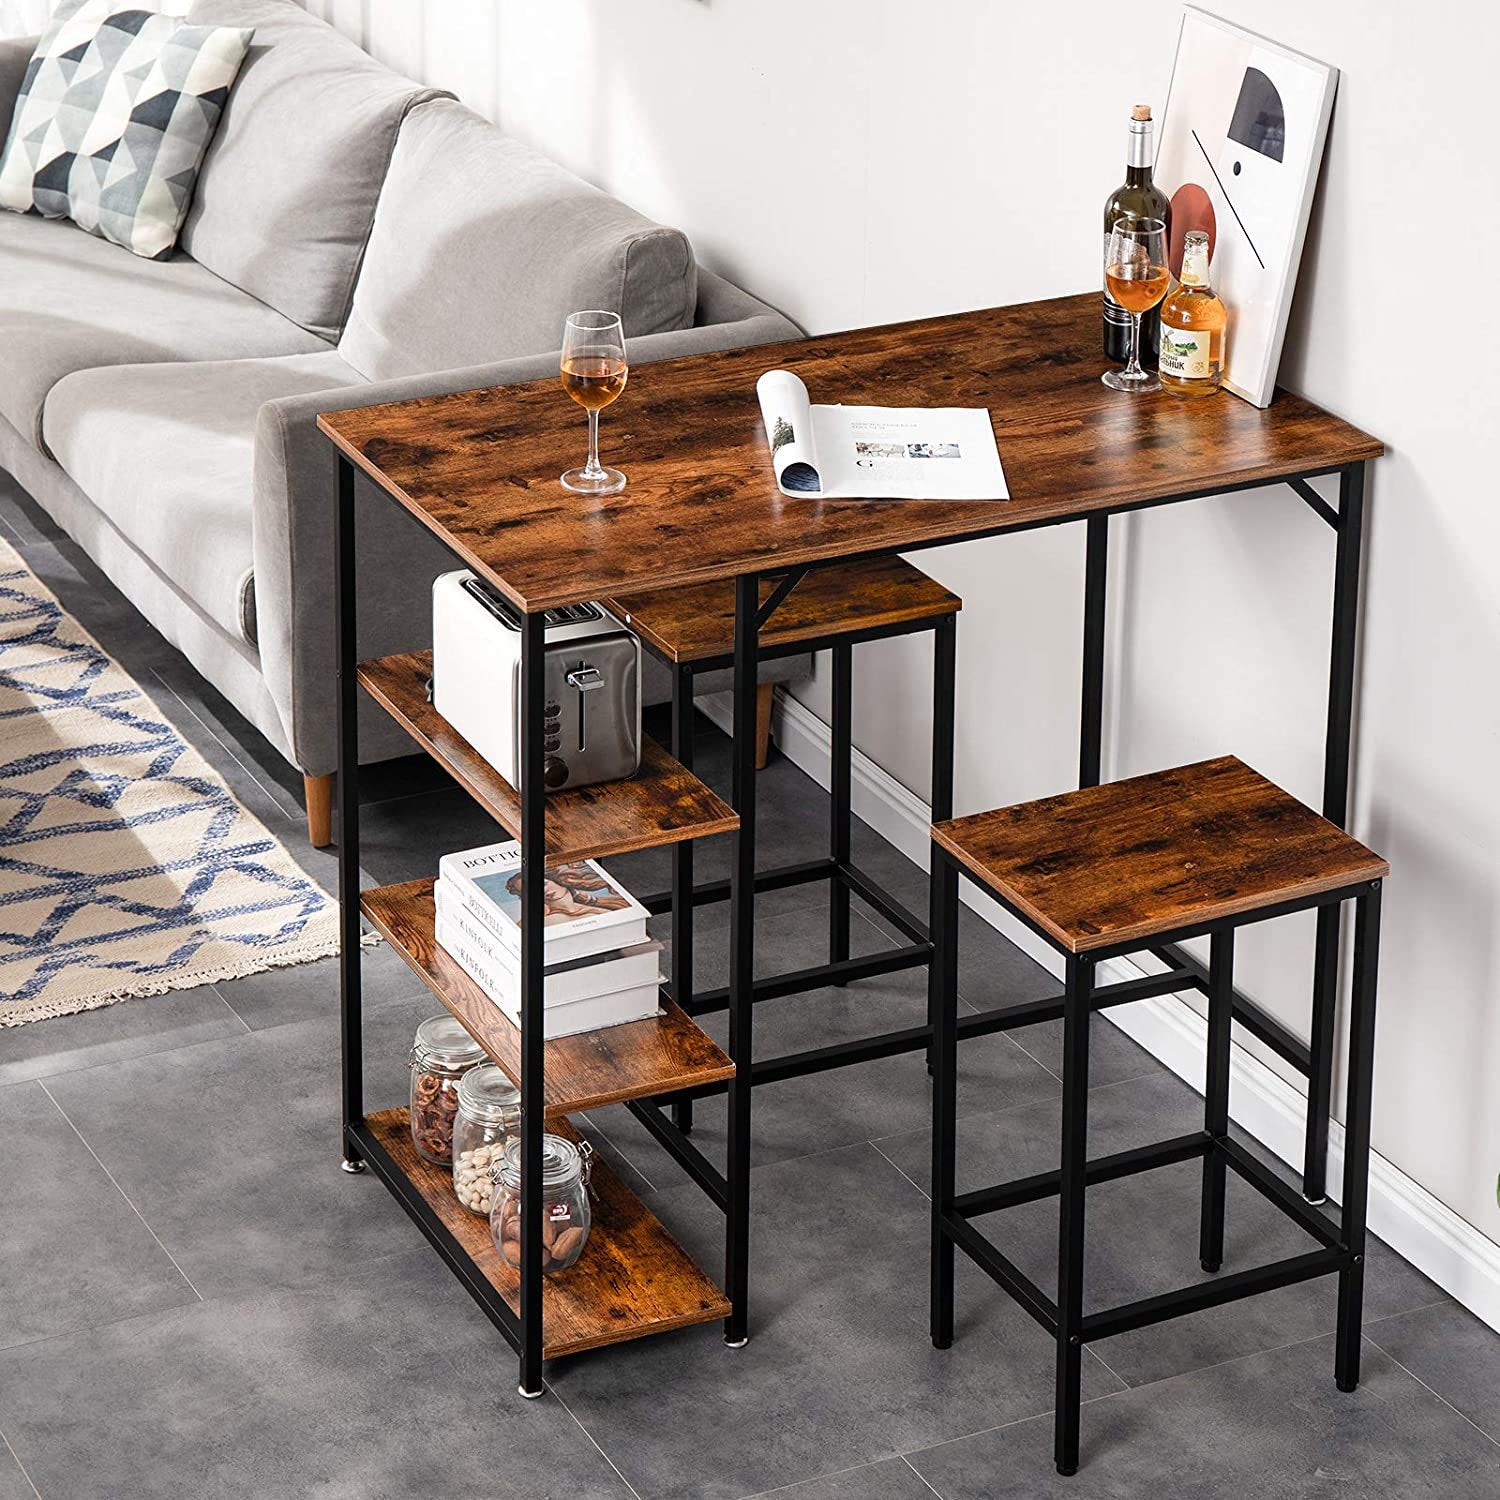 Rena Breakfast Bar Table Set with Stool